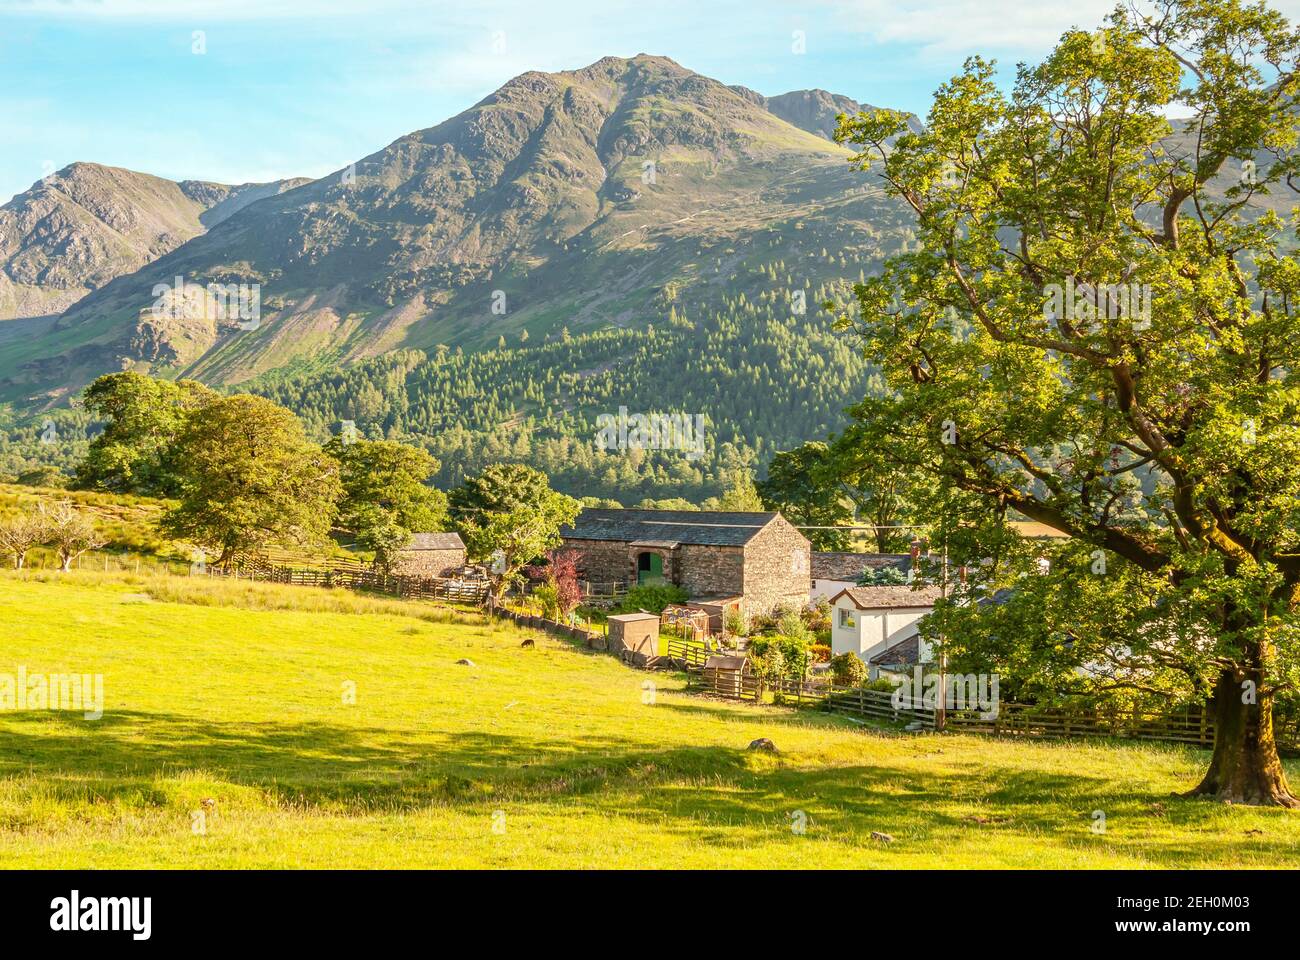 Landscape near Buttermere village in the English Lake District in North West England Stock Photo